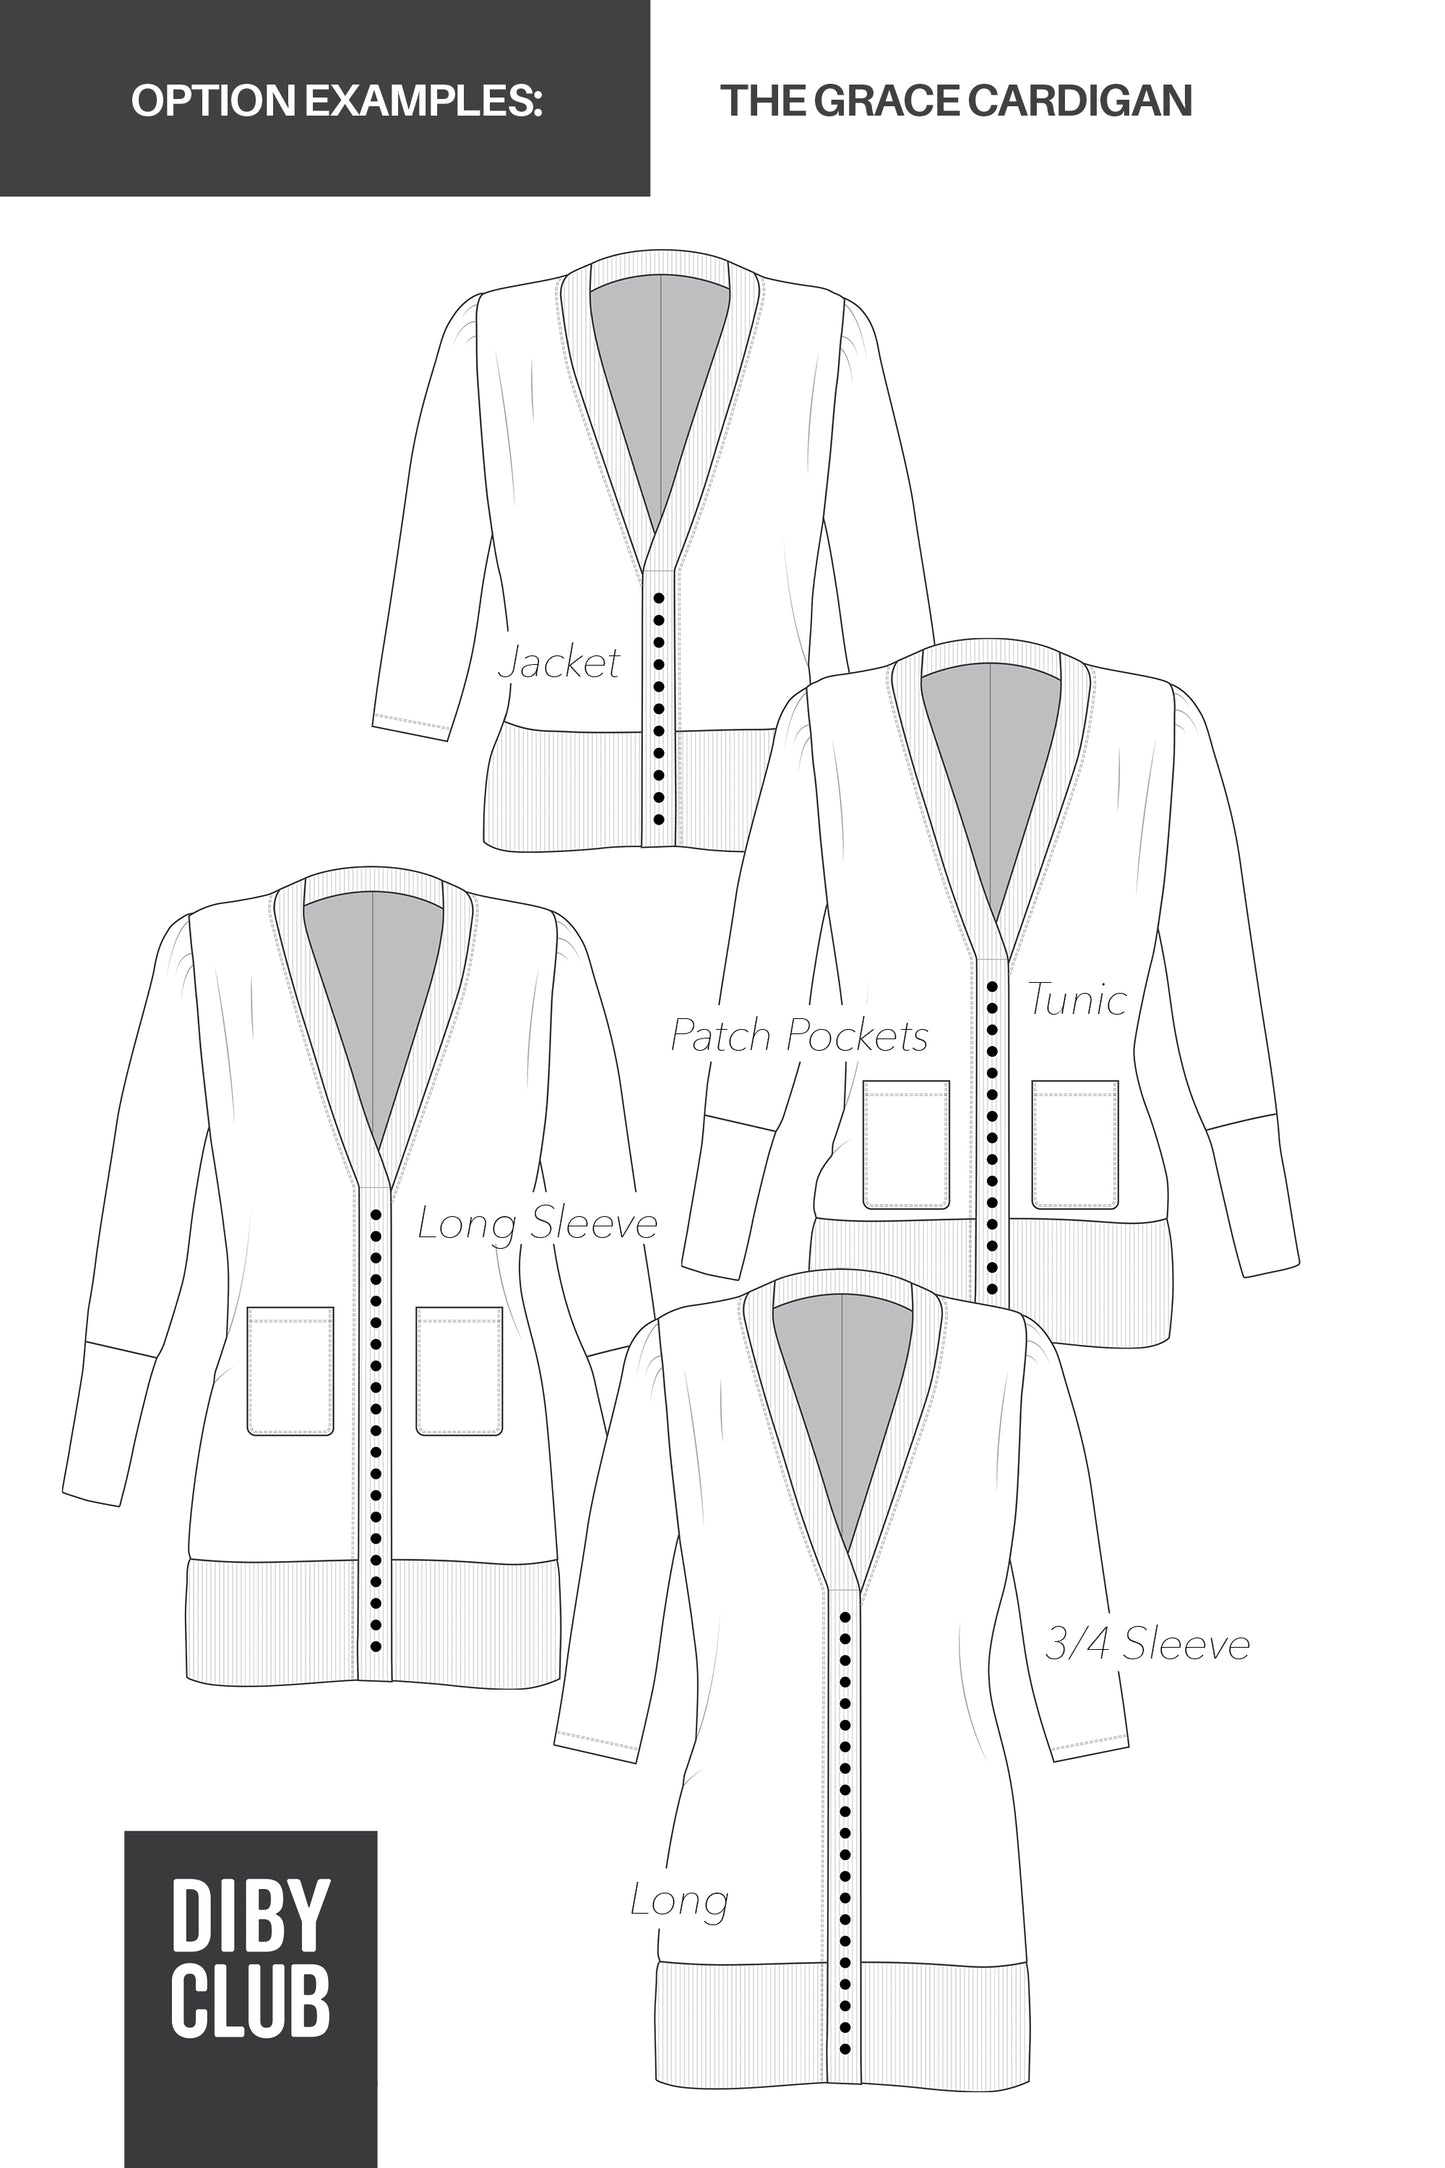 The Grace Cardigan option examples. 